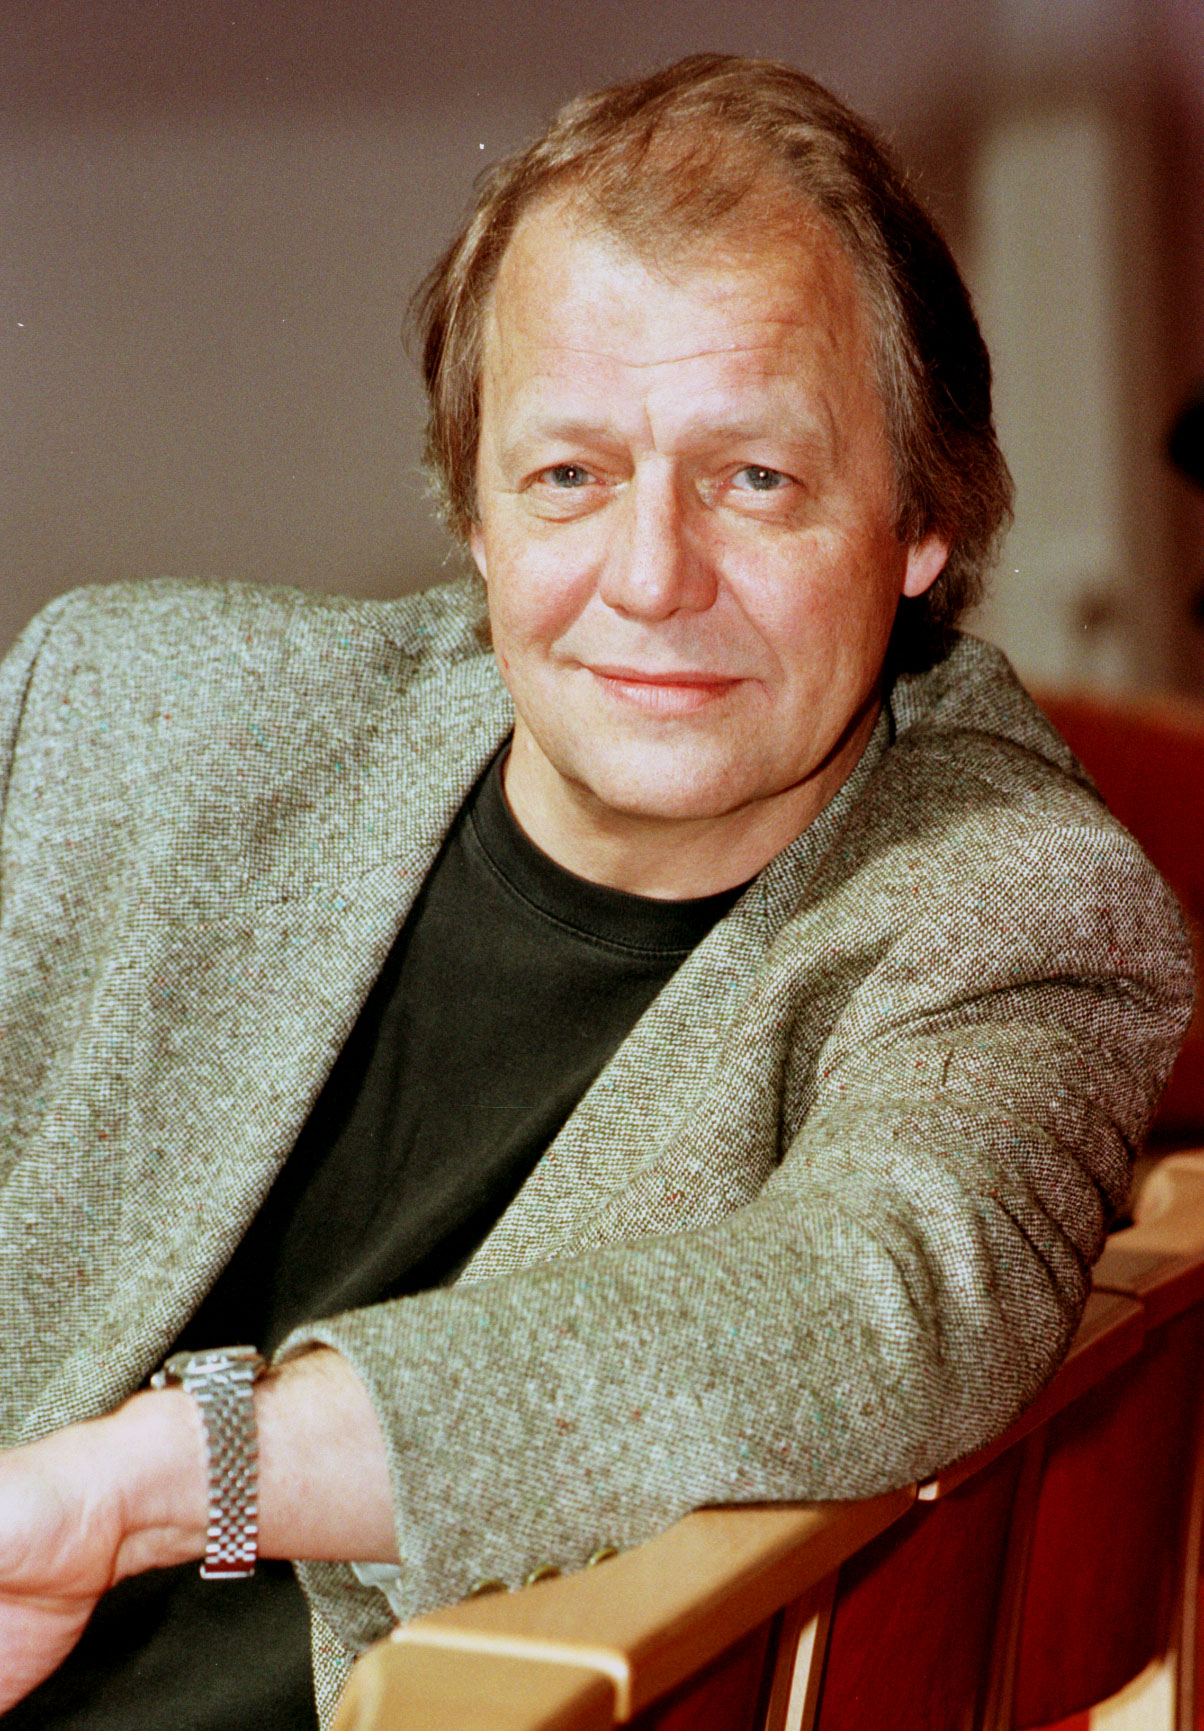 David Soul | Source: Getty Images